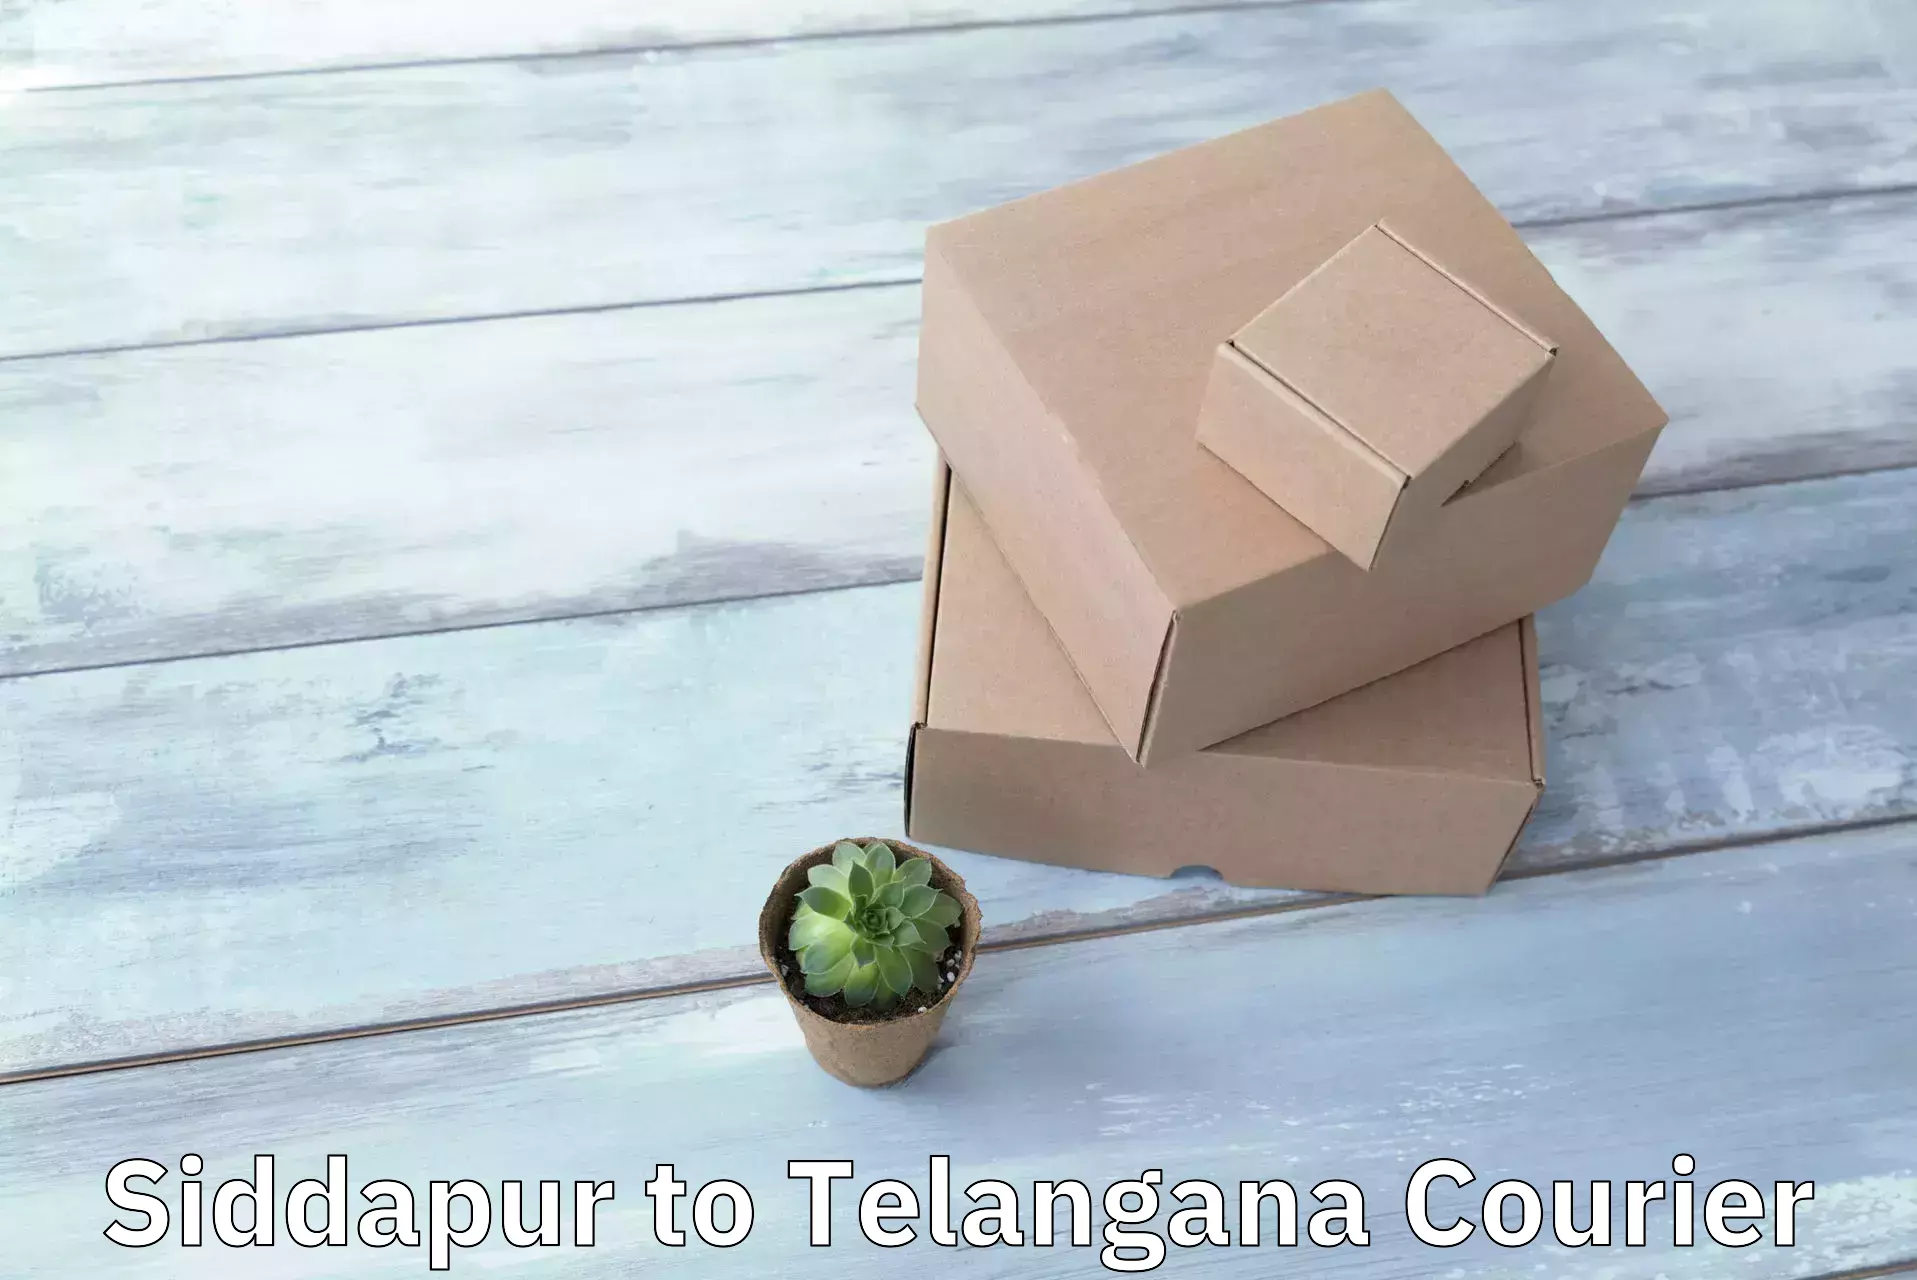 On-demand shipping options Siddapur to Mancherial